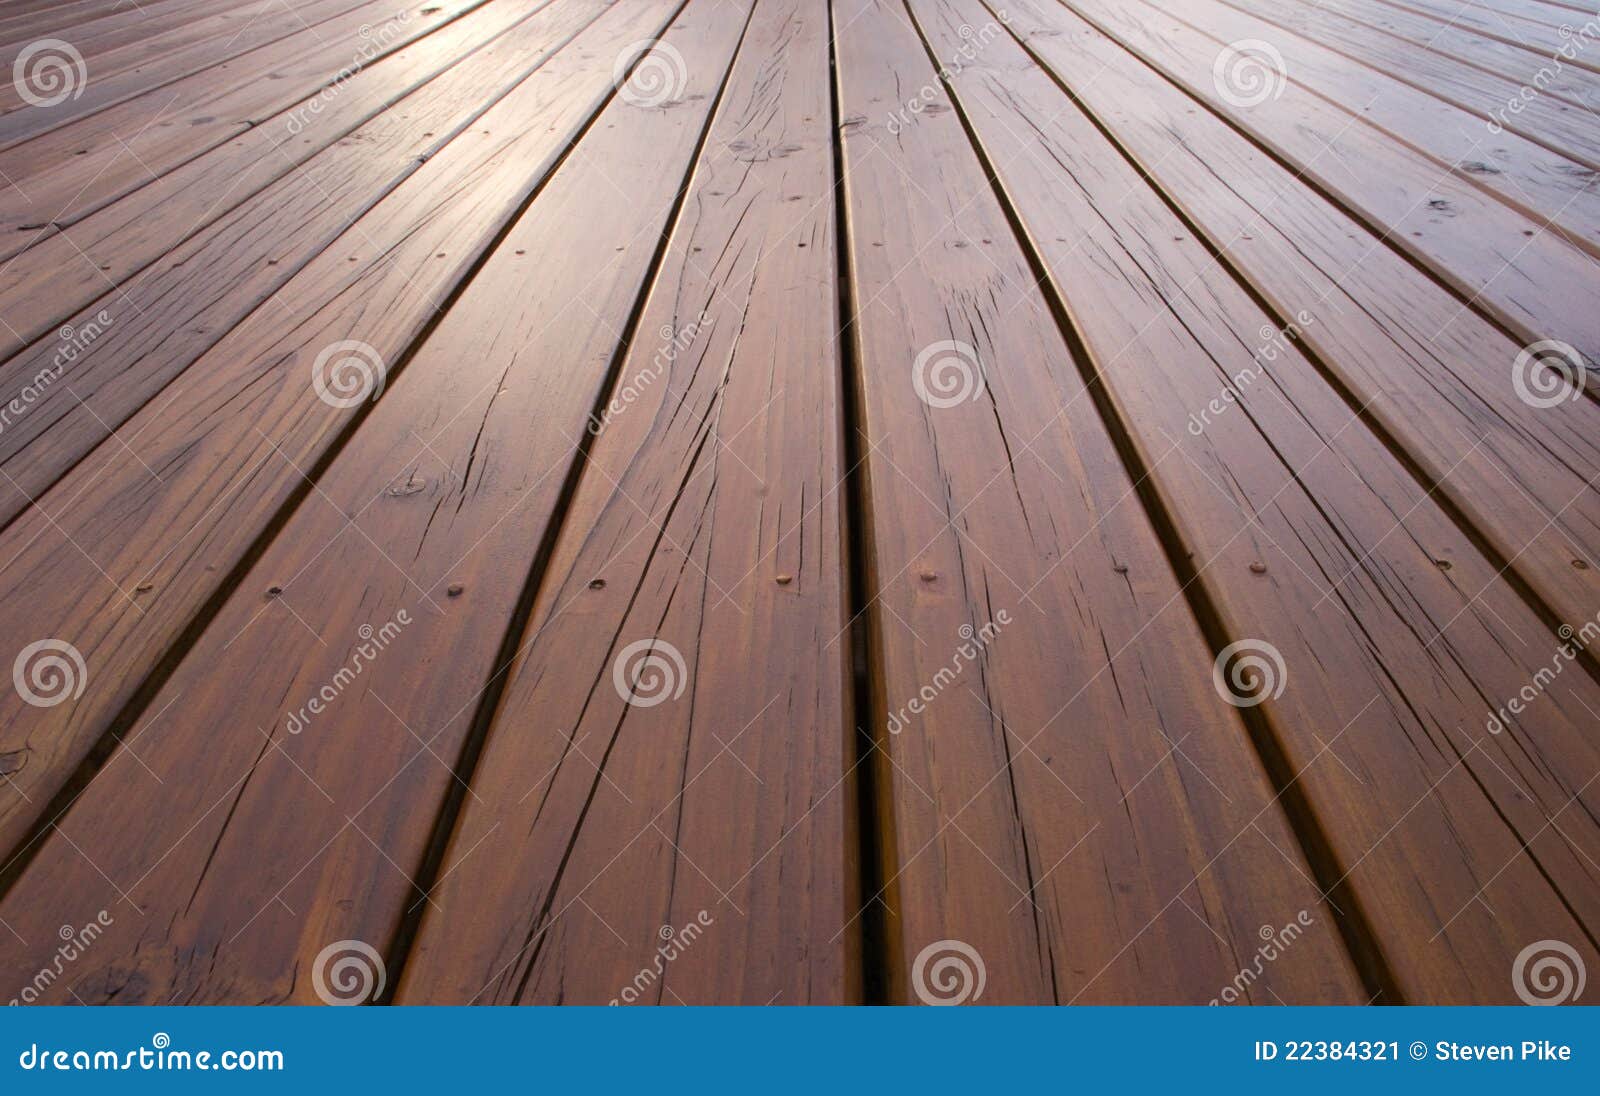 Planks of pine decking treated with deck oil.